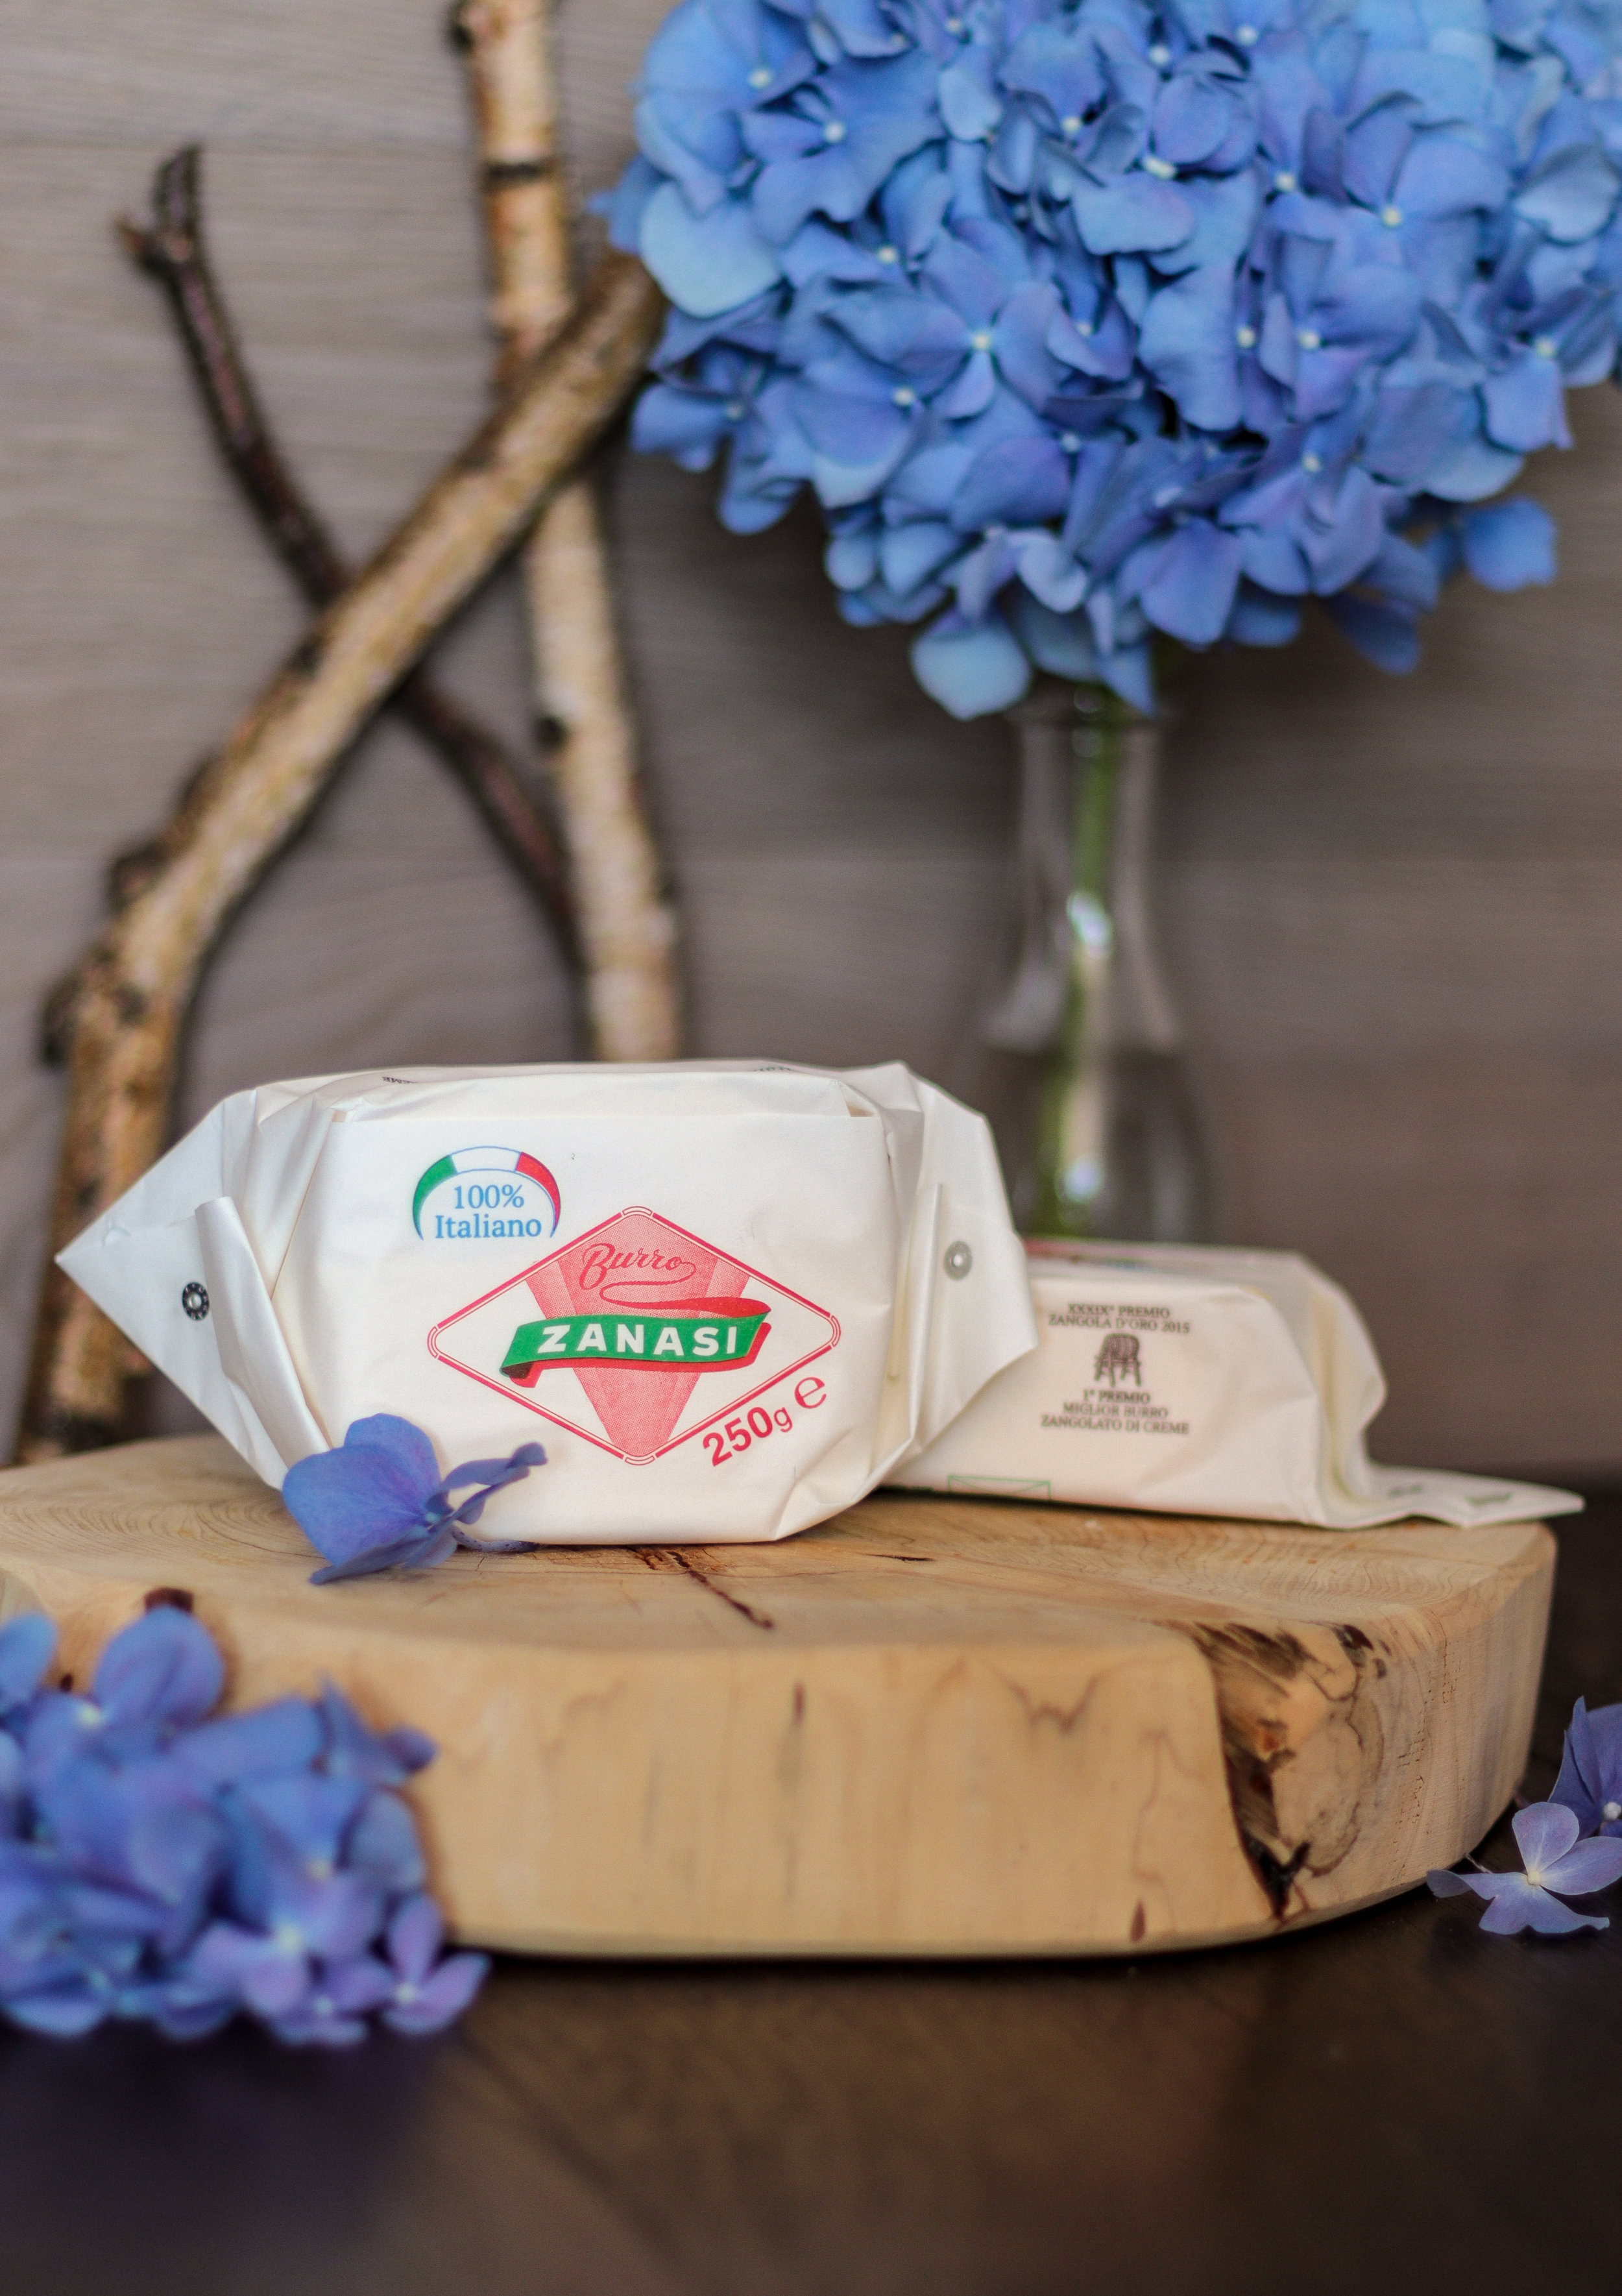 Our best selling butter, the "Malfatto" Zanasi available only in 250 GRs.